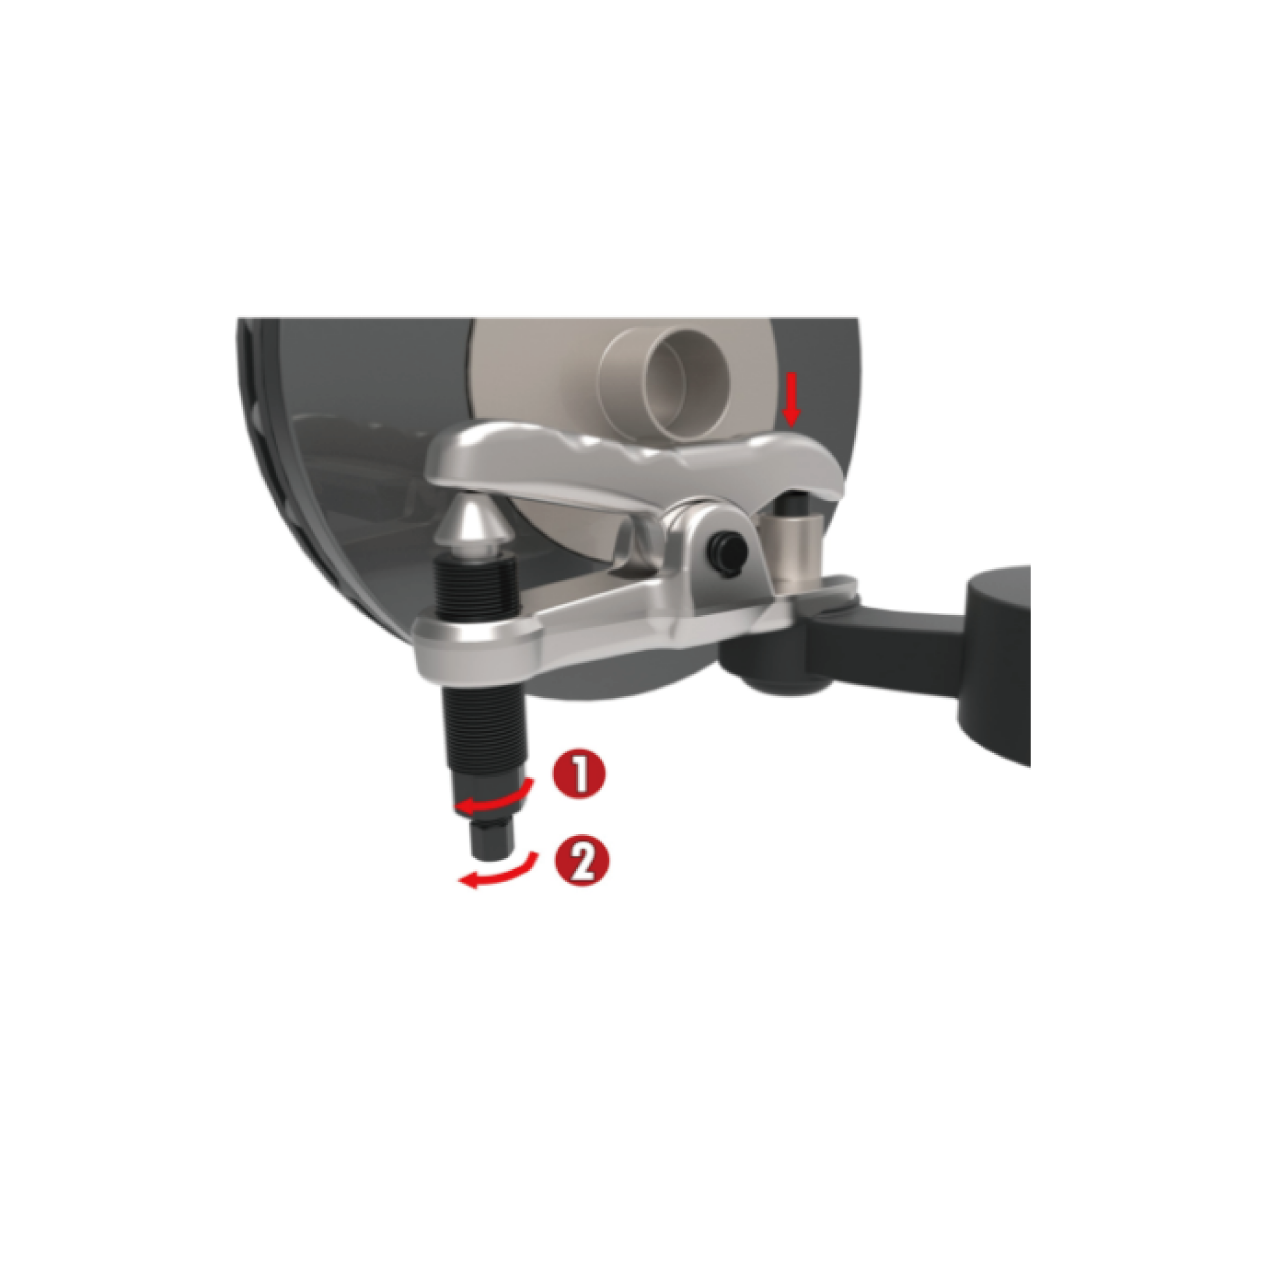 BALL JOINT SEPARATOR - HYDRAULIC